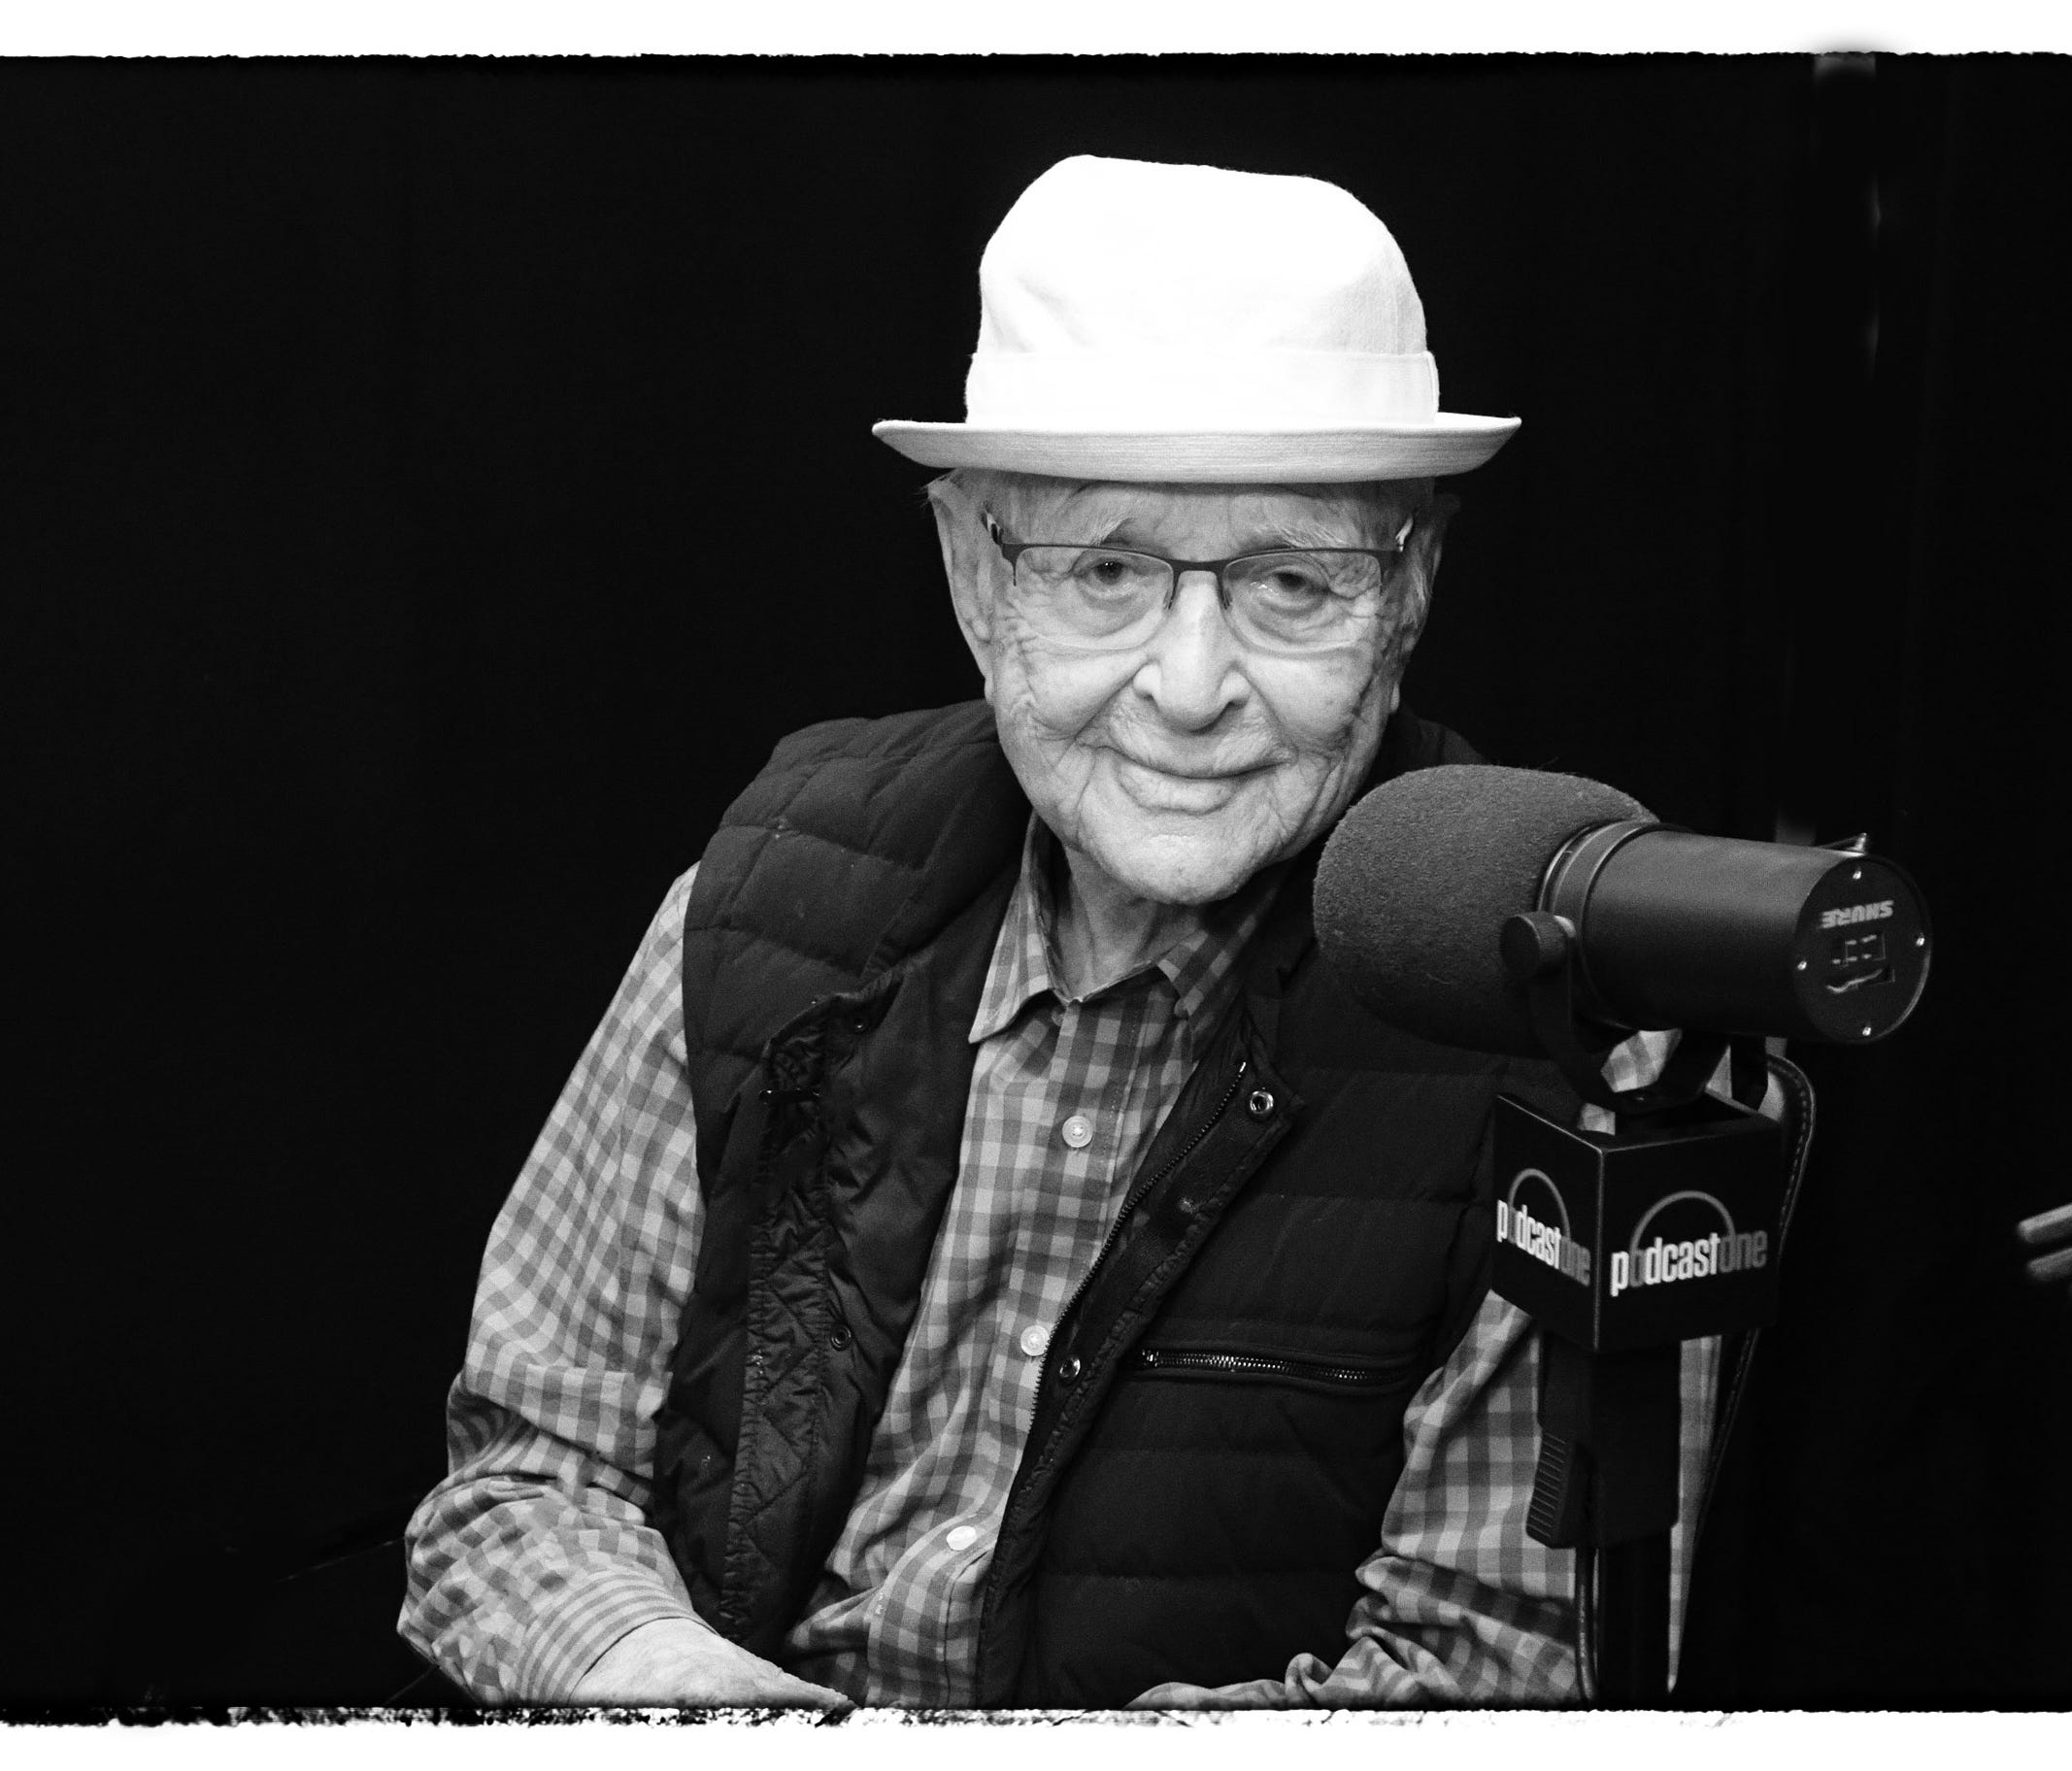 TV legend Norman Lear, photographed at Podcastone studios in Beverly Hills, CA.